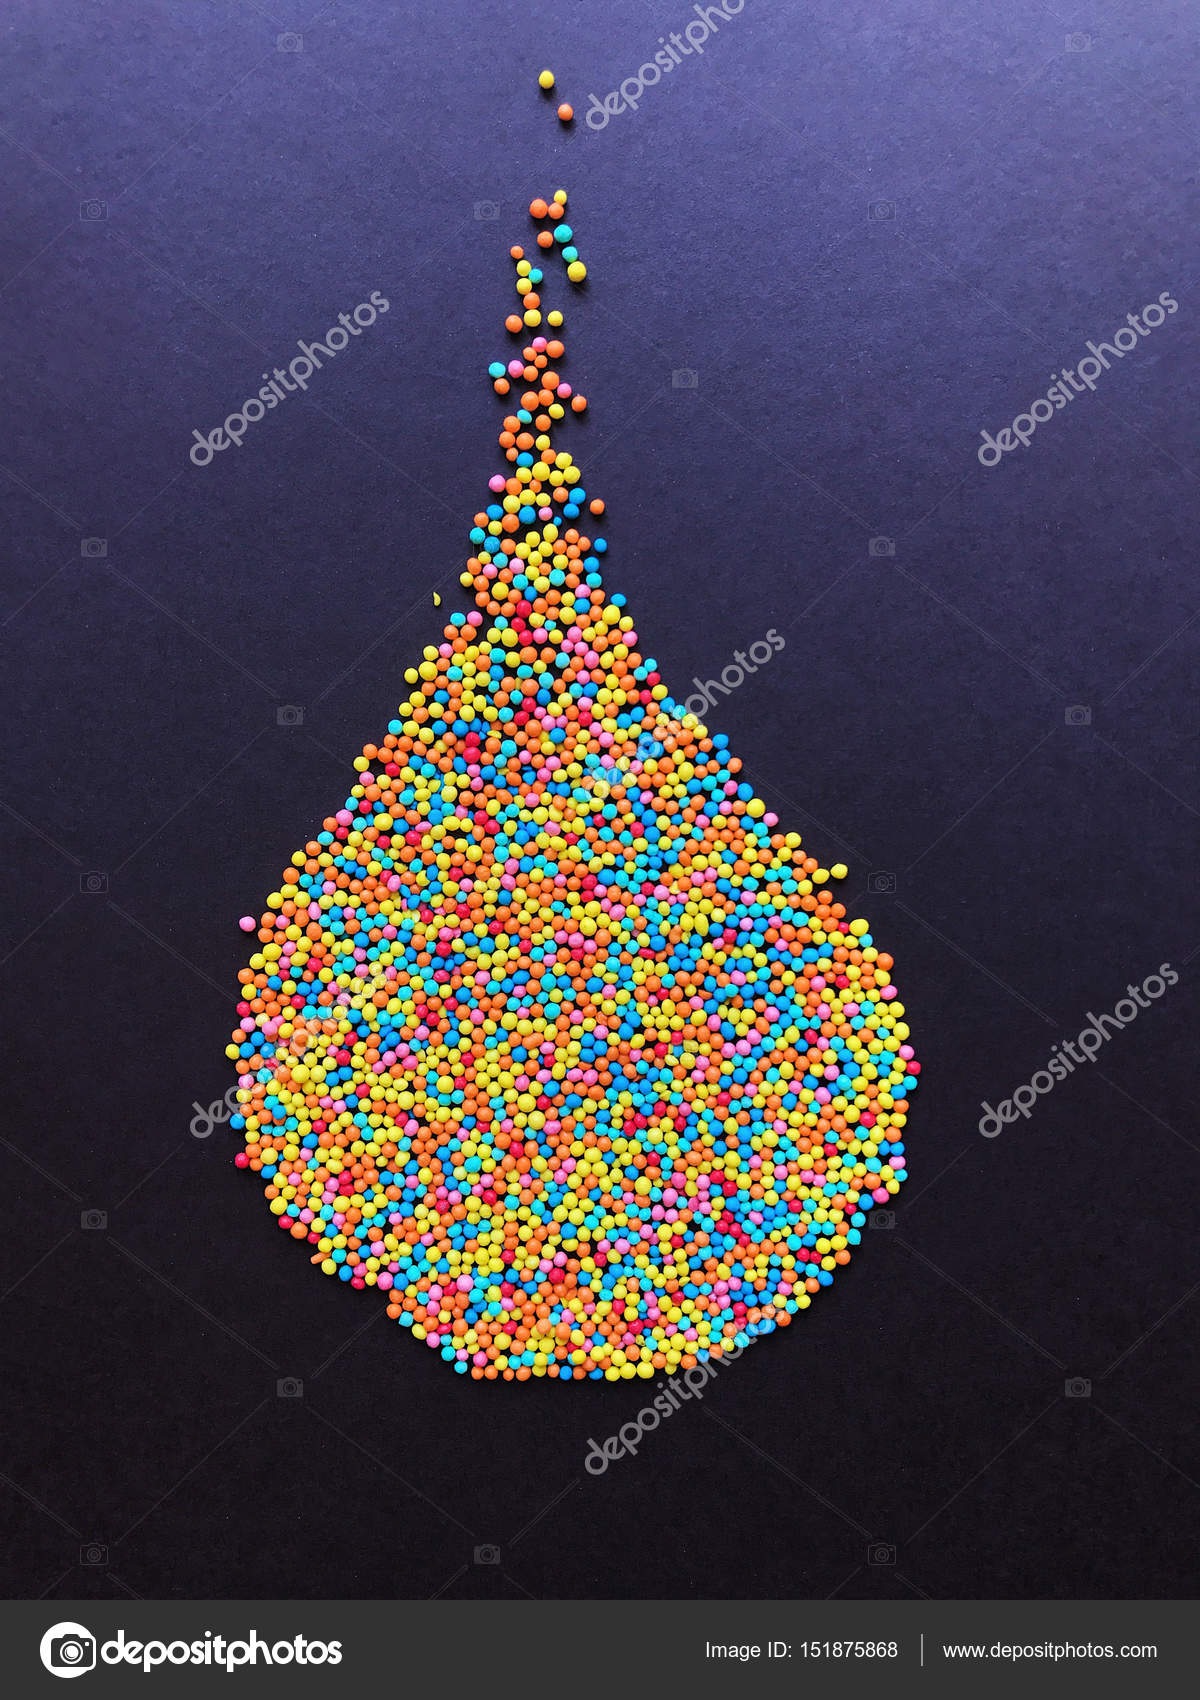 Confectionery sprinkling colored balls — Stock Photo © Softulka ...